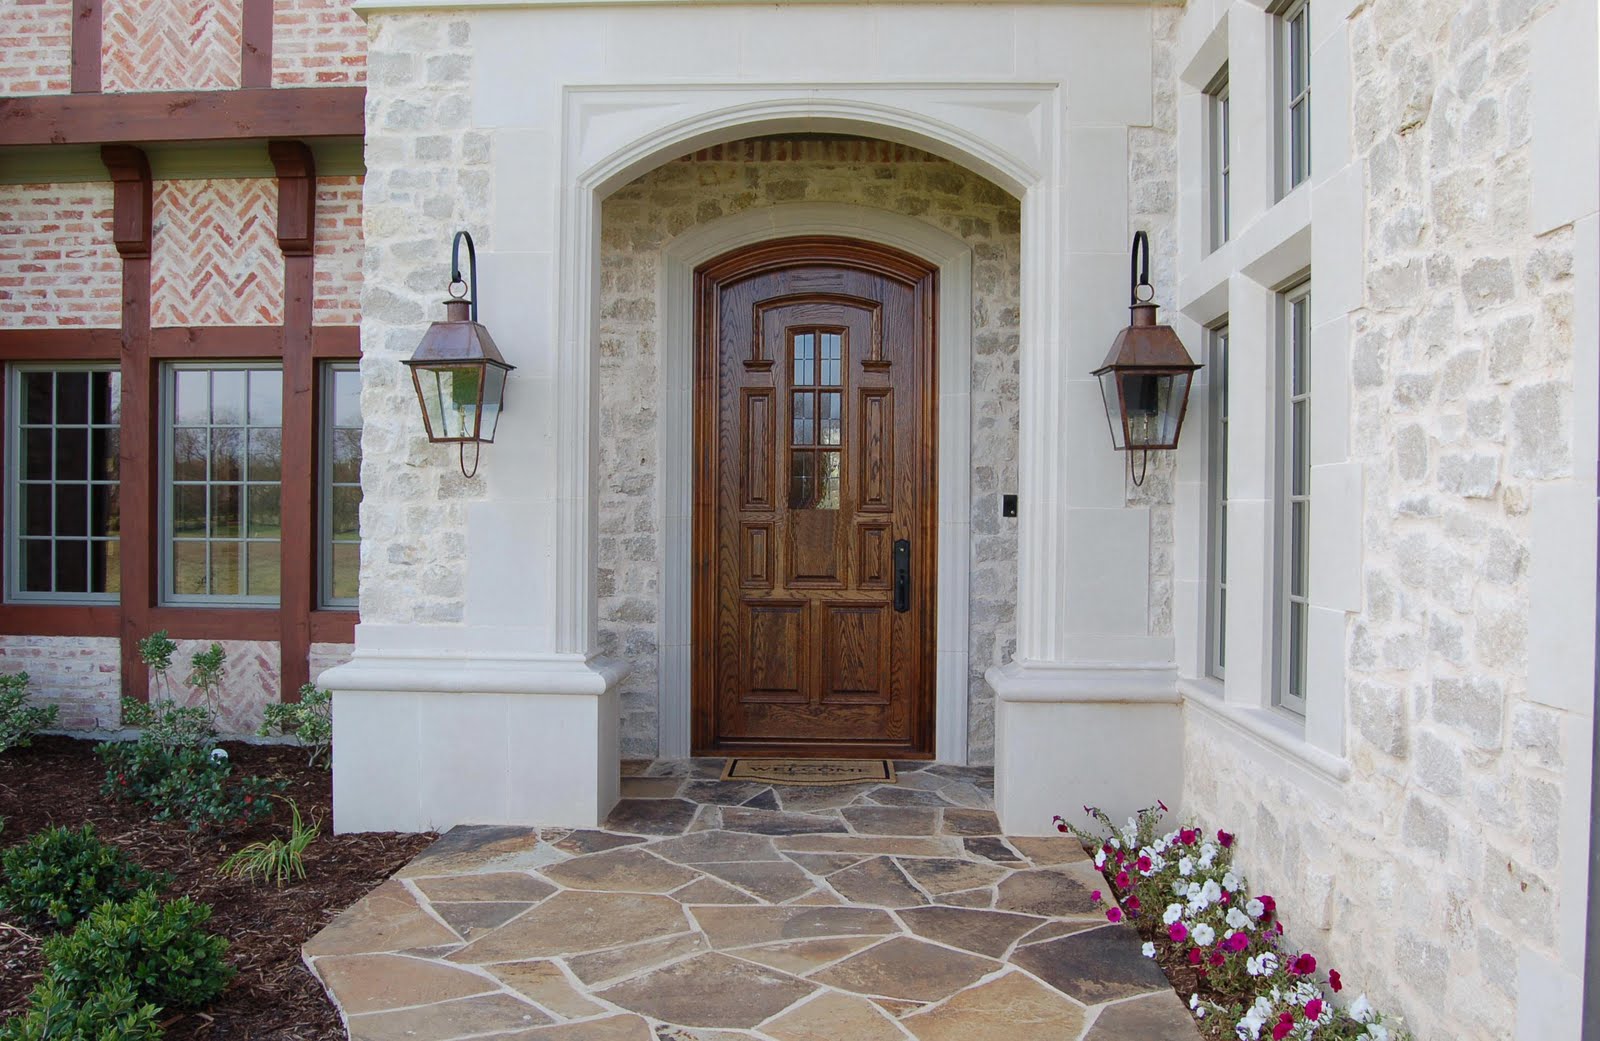 Contemporary Entryway Lantern Amazing Contemporary Entryway With Wall Lantern Lamps With Dark Brown Wooden Front Door Ideas Combined With Glass Accents And Completed With Beautiful Flowers On Side Entryway Exterior Front Door Ideas: The “Face” Of The House